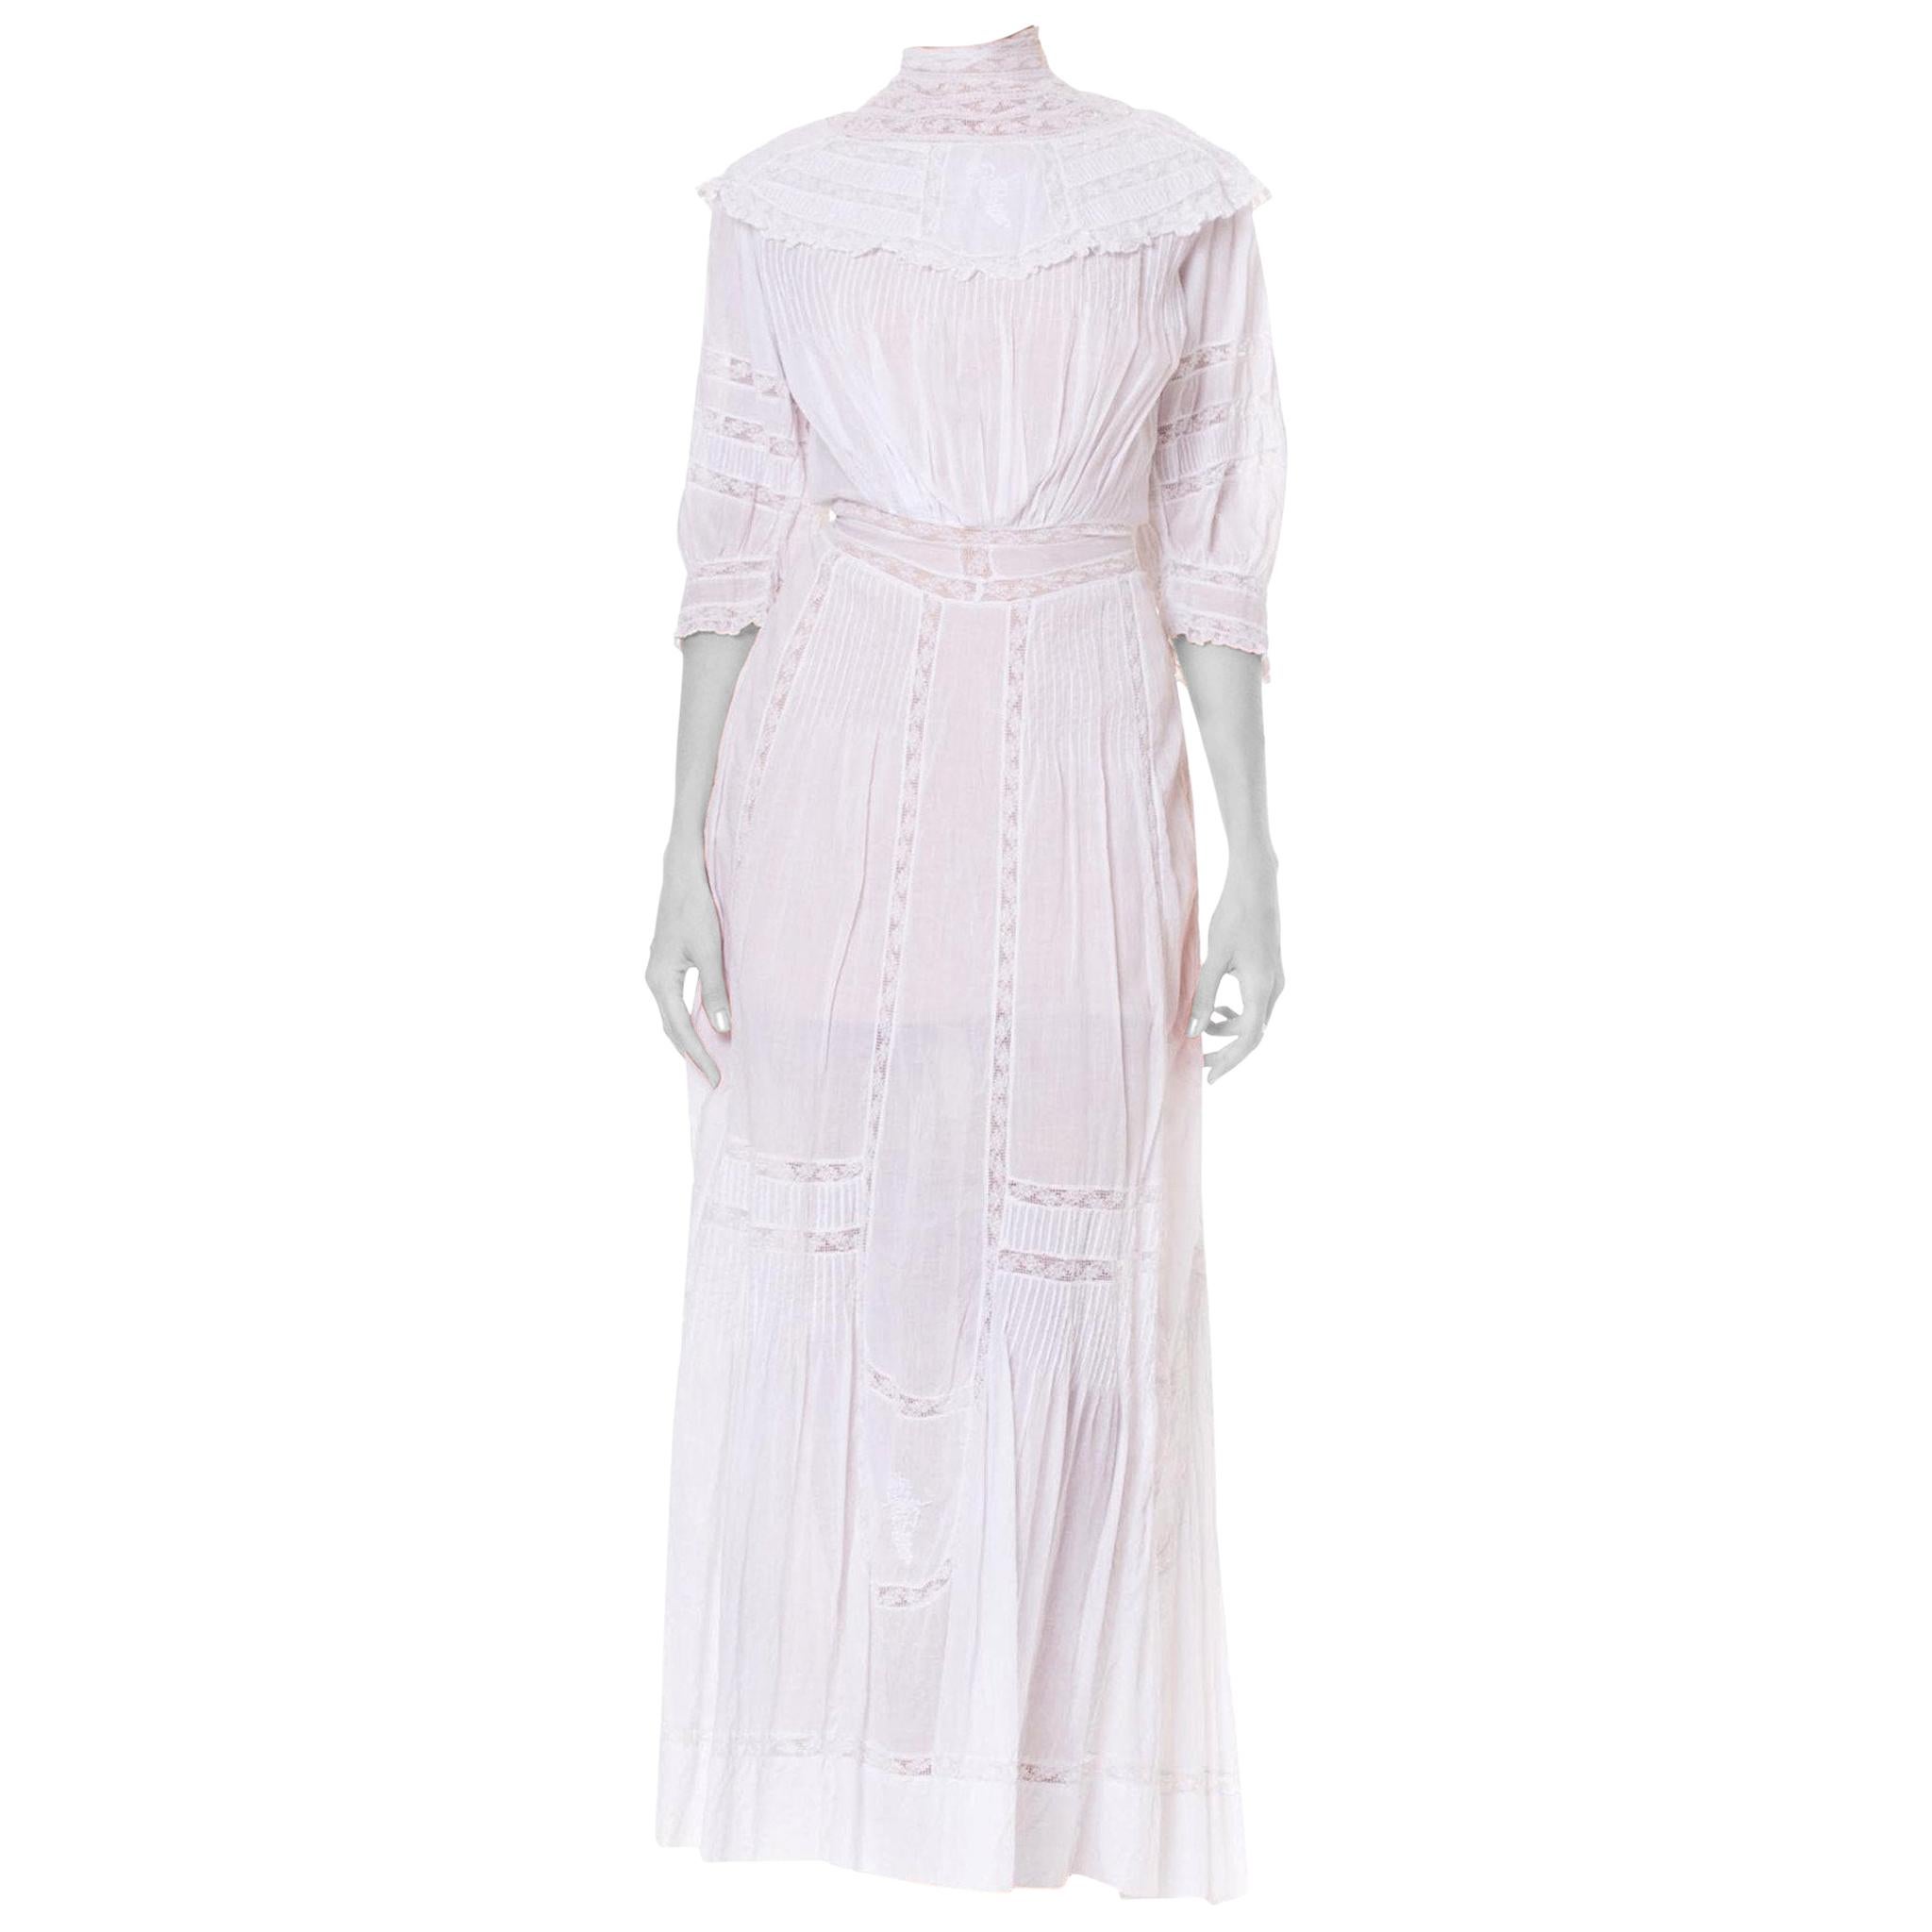 Victorian White Cotton Voile Lace Tea Dress With Half Sleeves